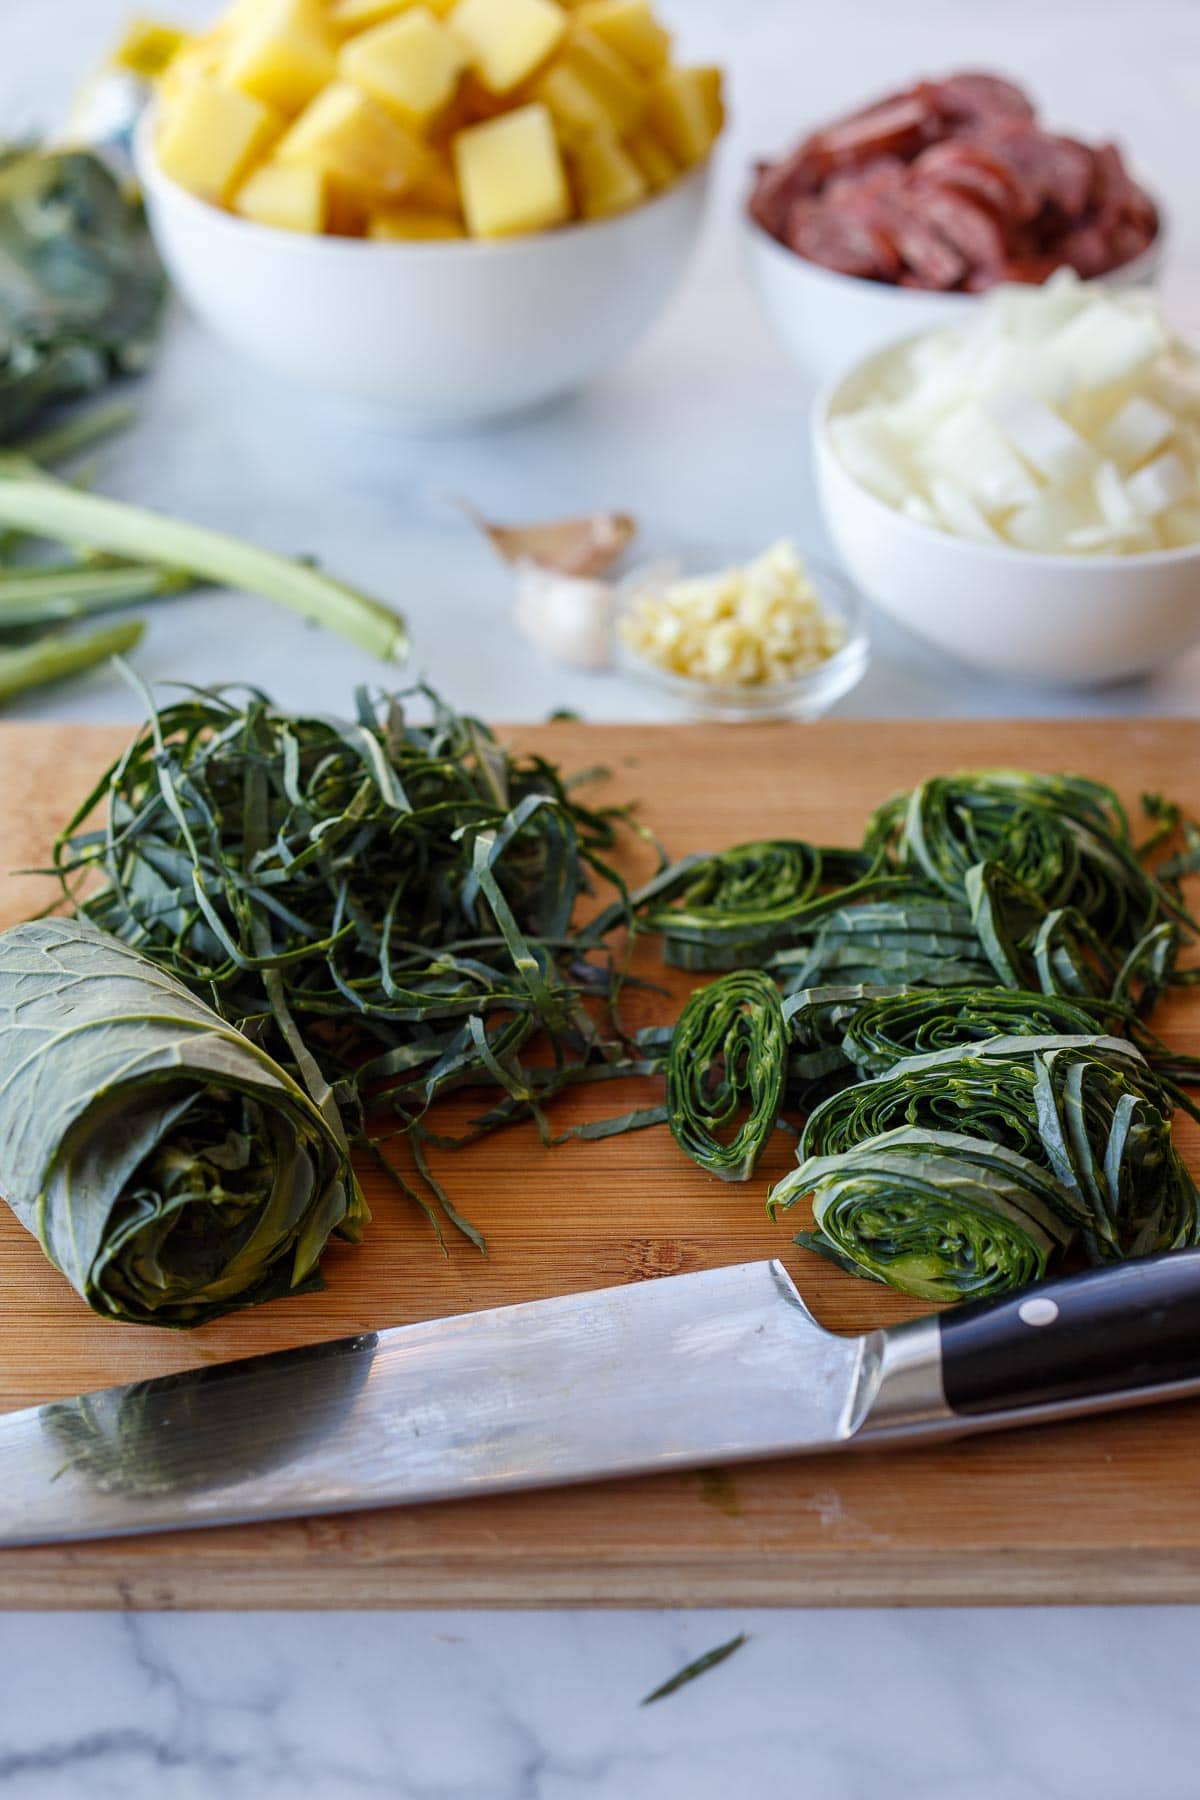 Chopped ingredients and collard green ribbons.